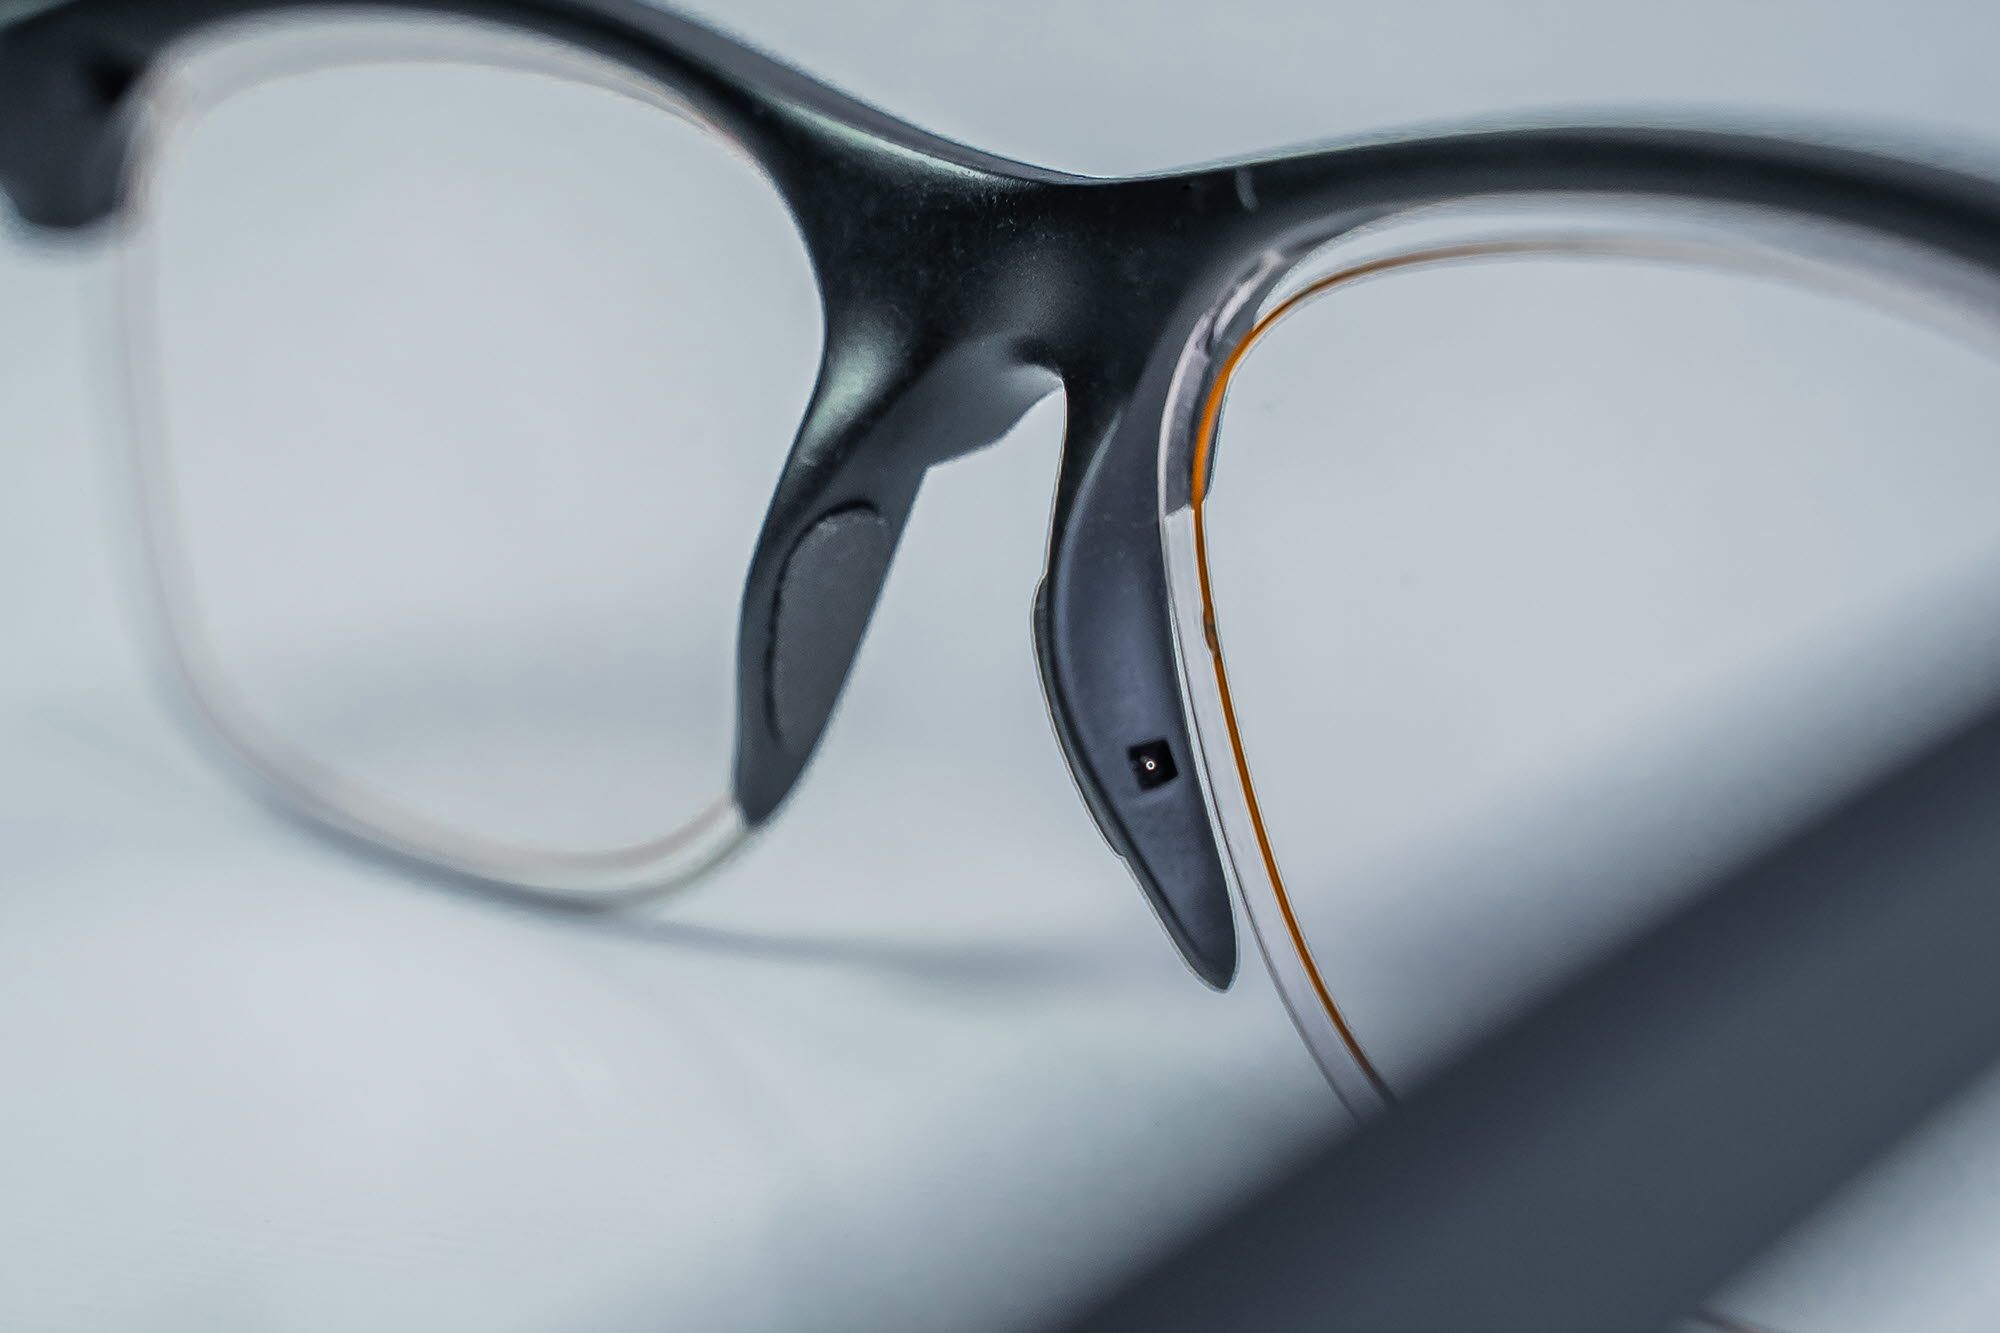 Smart glasses with components